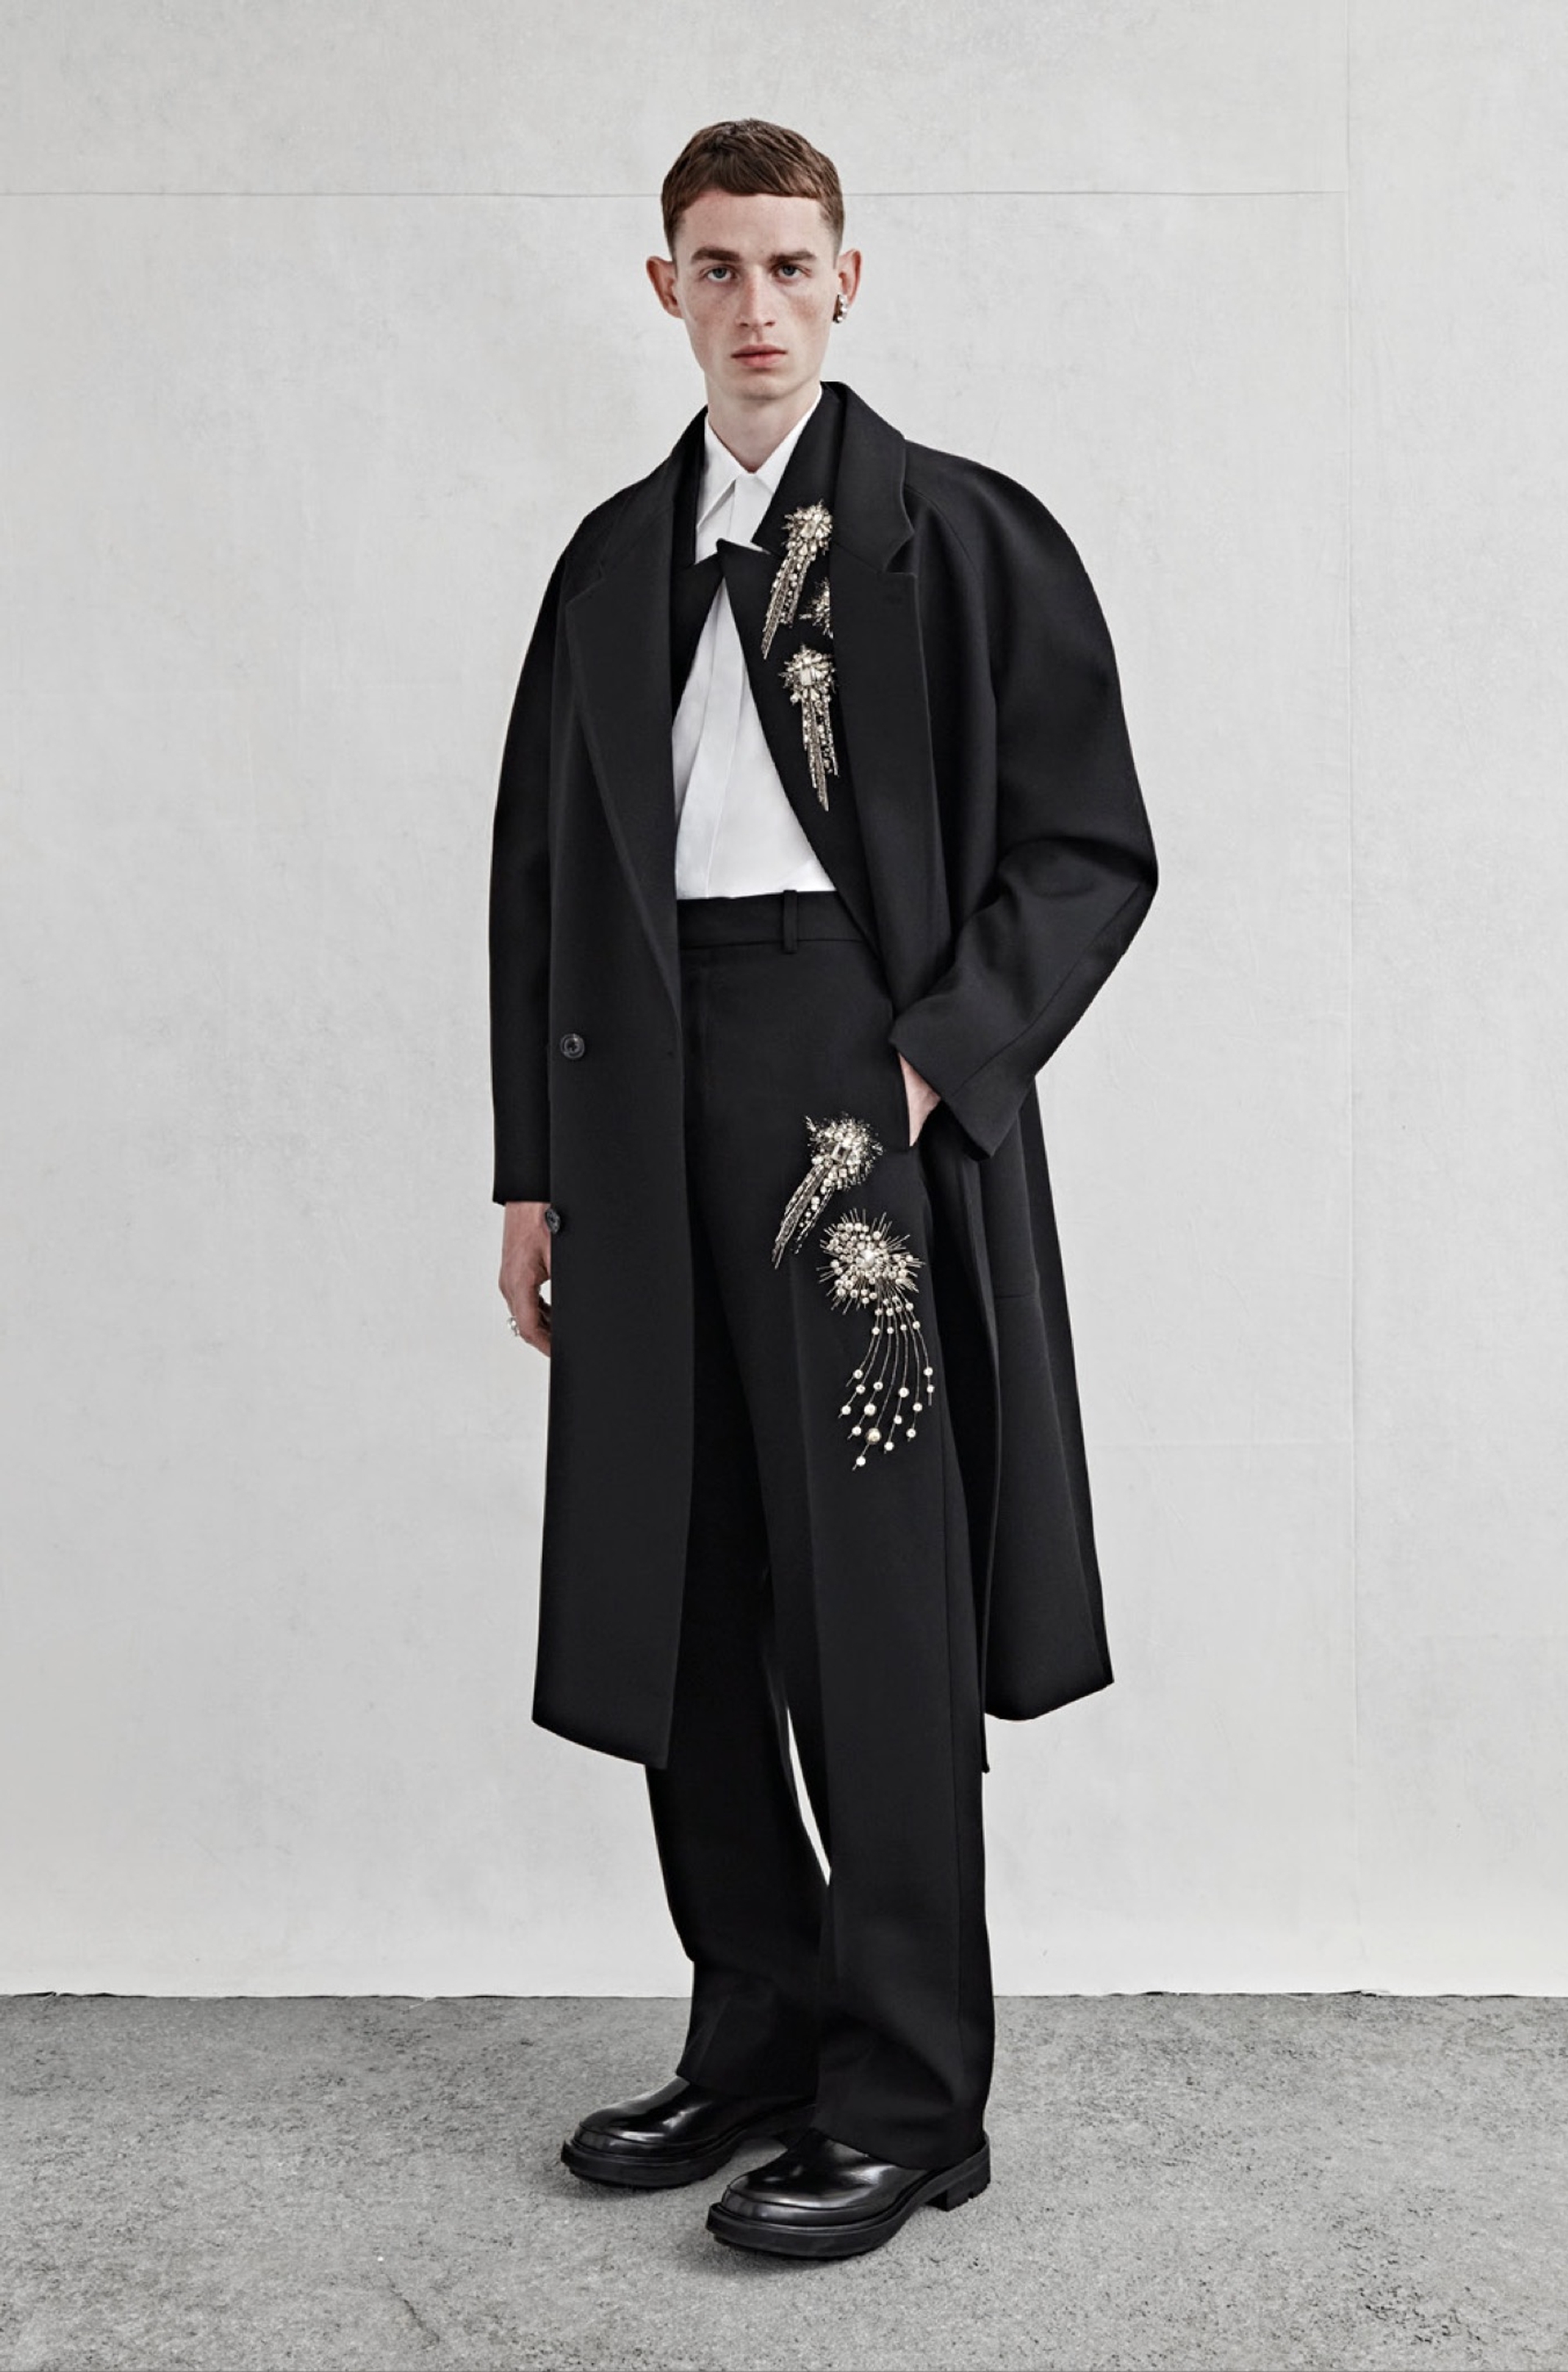 An oversized double-breasted tailored coat in black wool twill, a tailored waistcoat in black barathea with silver sequin and crystal astral embroidery, a shirt in white cotton poplin and tailored wide-legged trousers in black barathea with silver sequin and crystal astral embroidery.